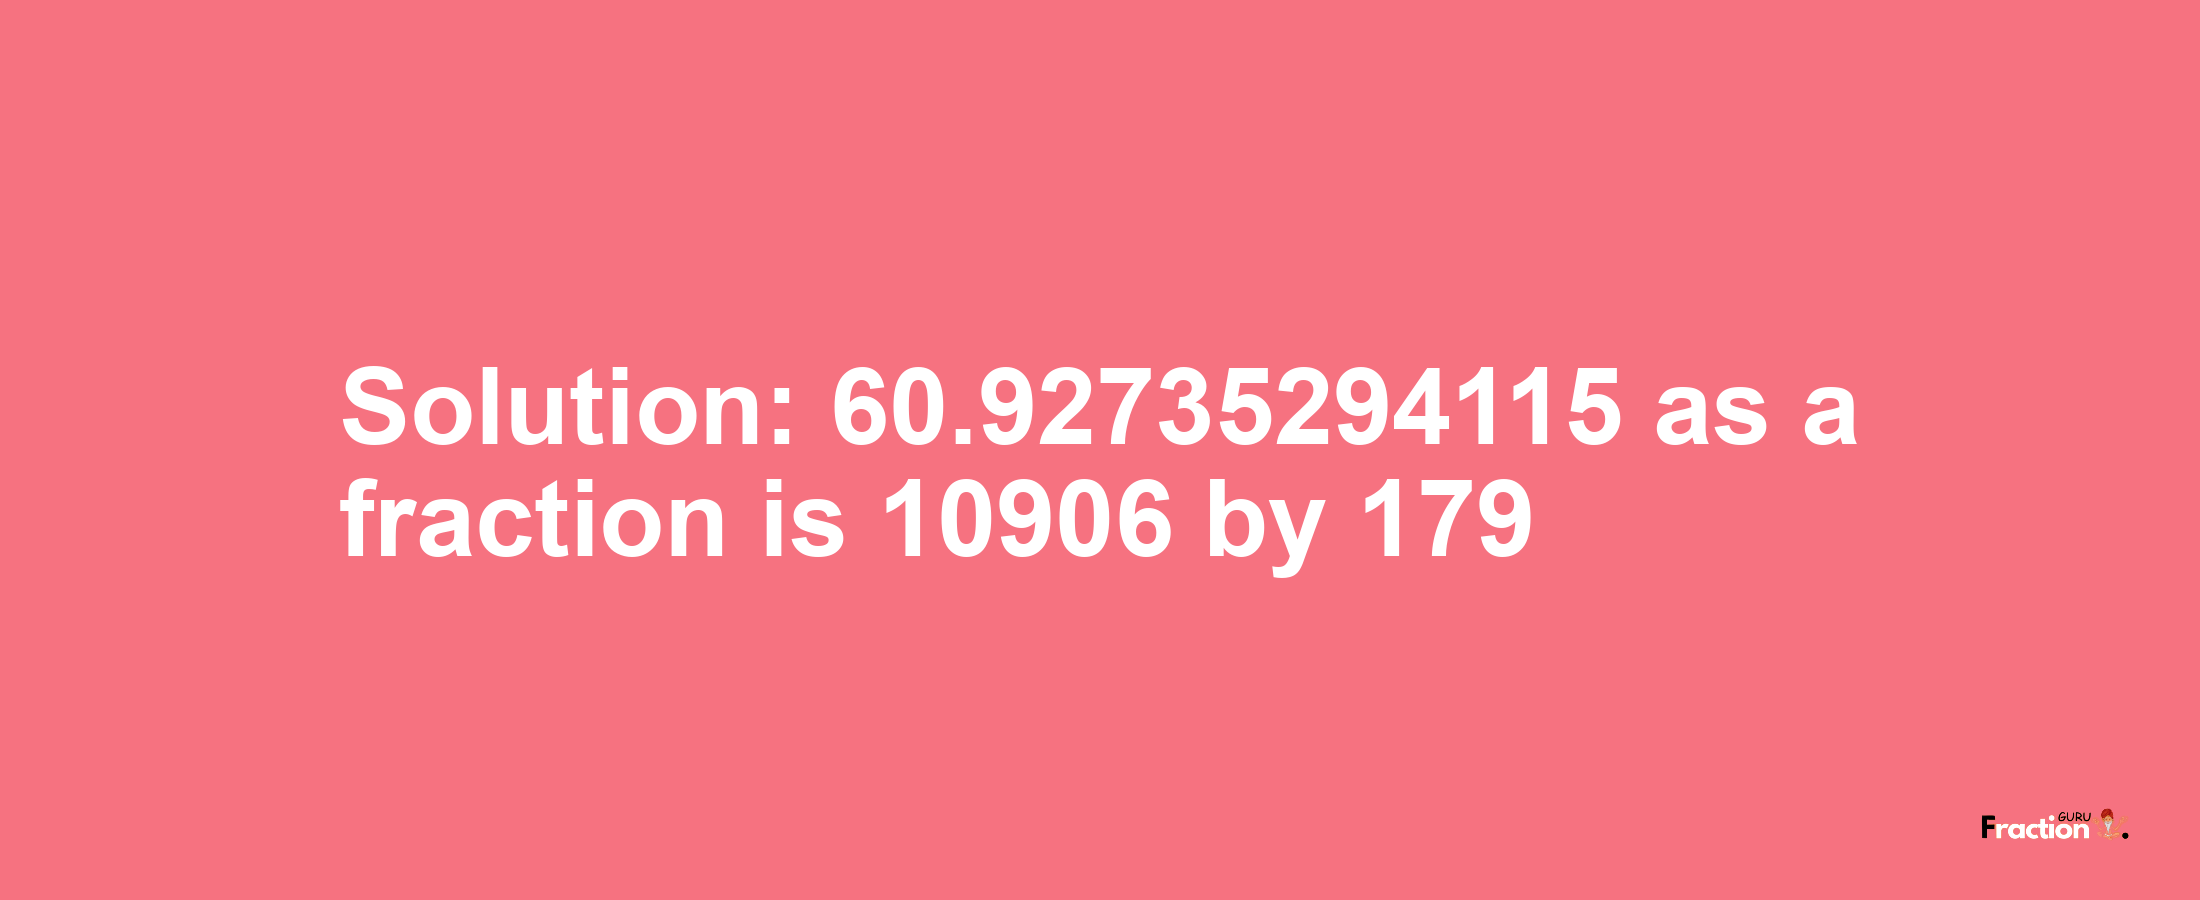 Solution:60.92735294115 as a fraction is 10906/179